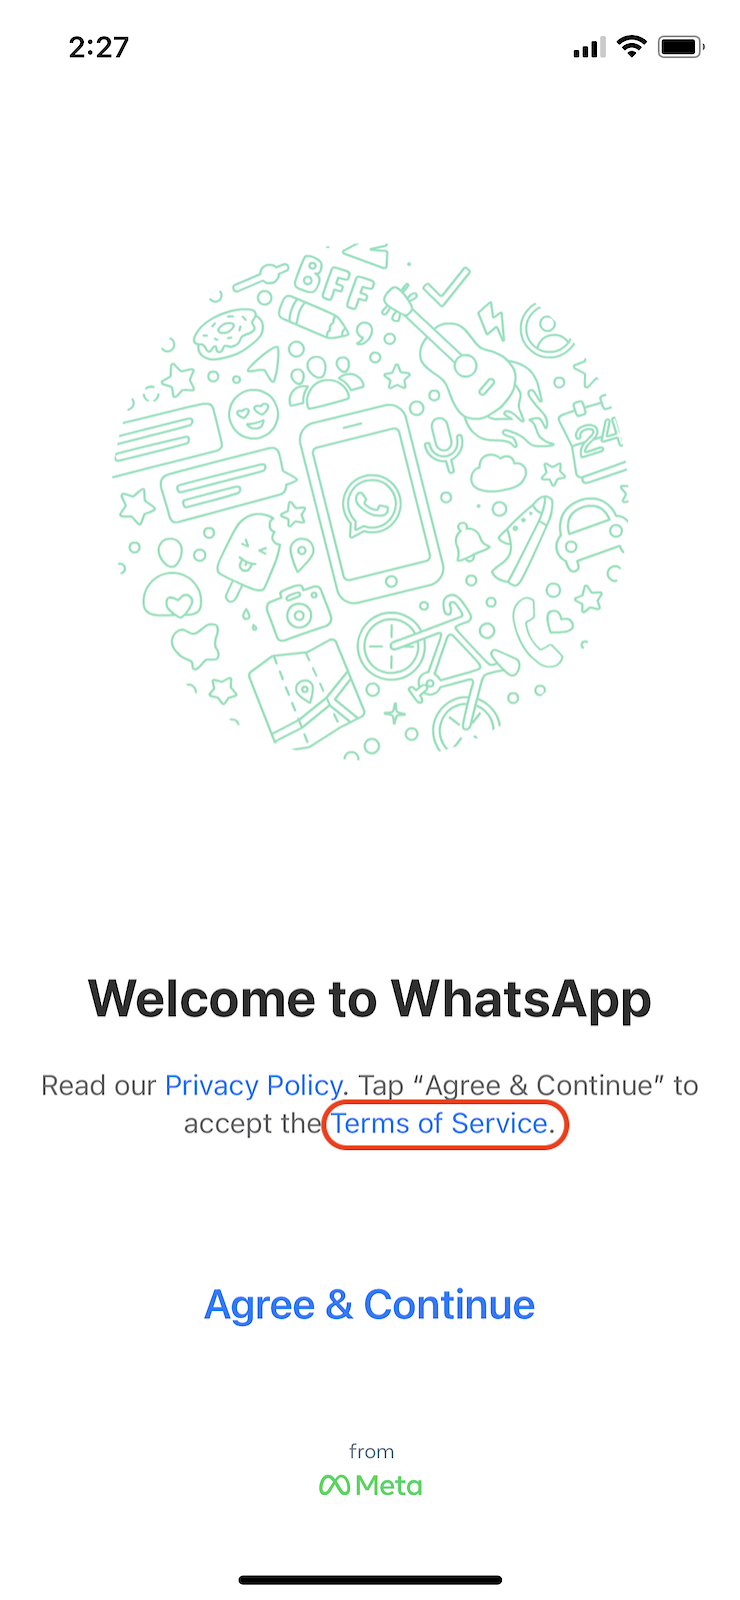 WhatsApp-terms-and-conditions-user-prompt